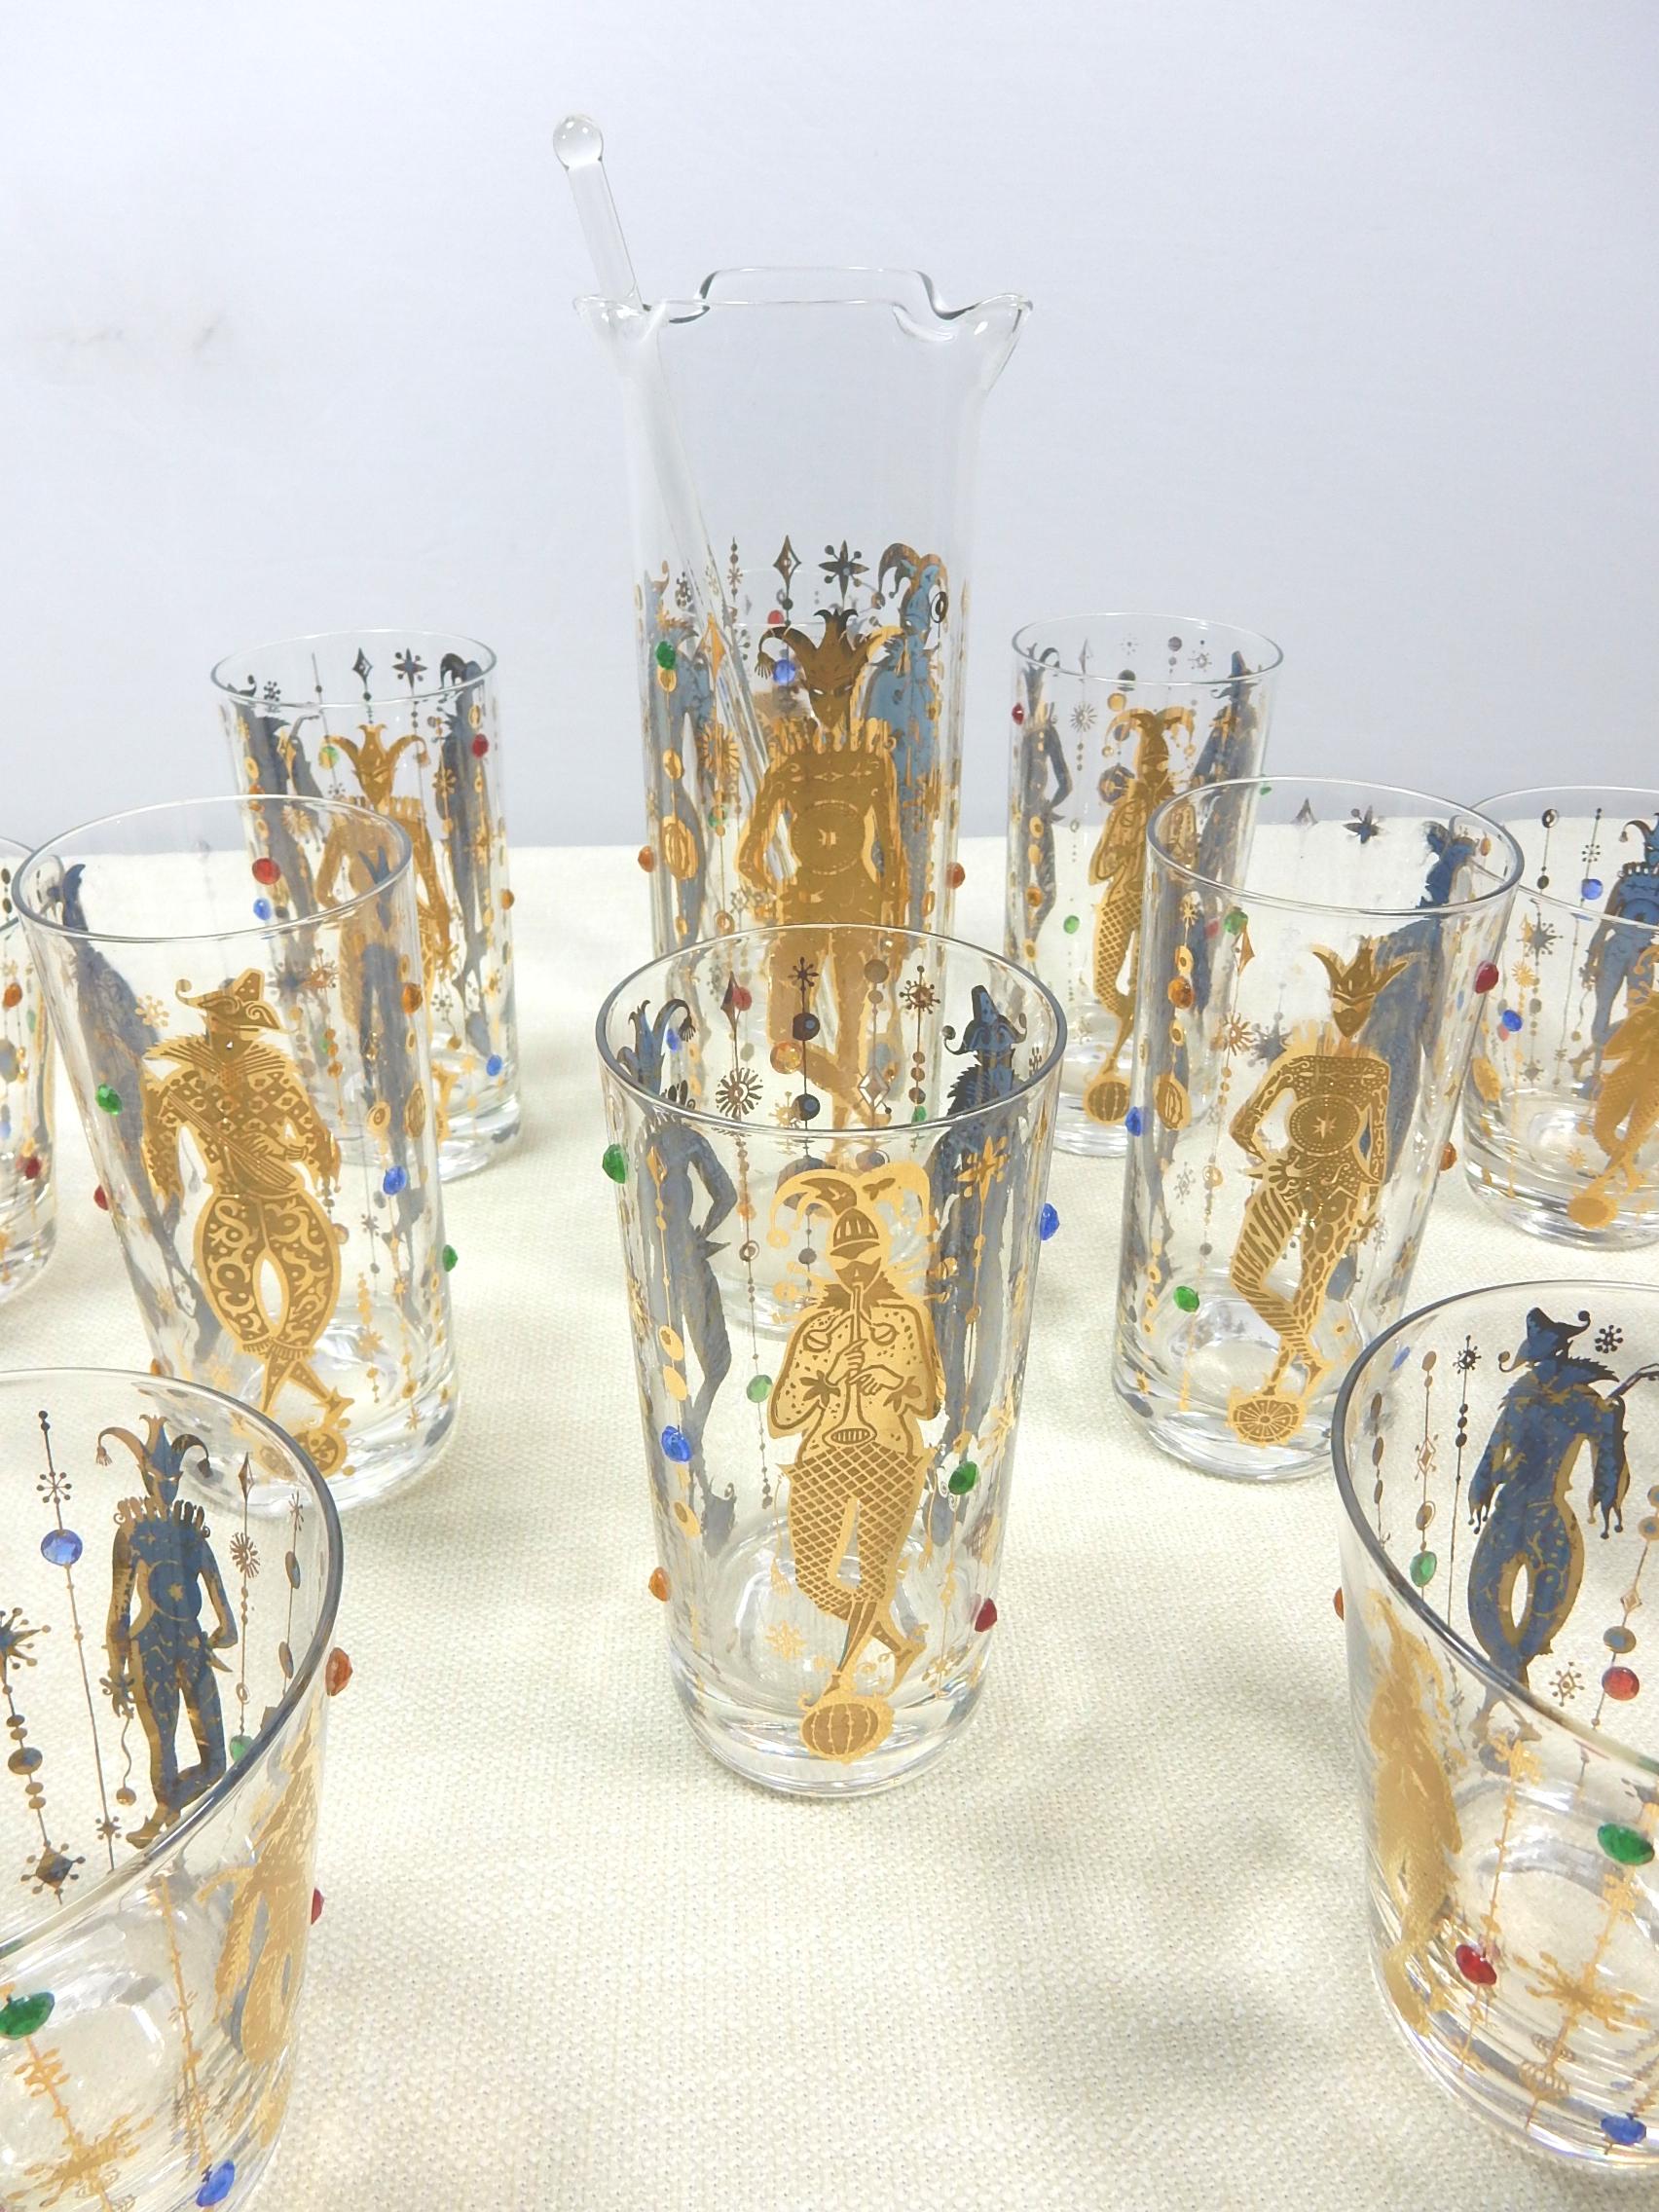 Rare 1960's bar glasses set by Culver LTD.
Harlequin design in 22-karat gold with applied colored jewels.
2 sets of 6 glasses and martini pitcher,
6 highballs and 6 rocks with tall martini mix pitcher and glass stir stick.
All pieces are in barely